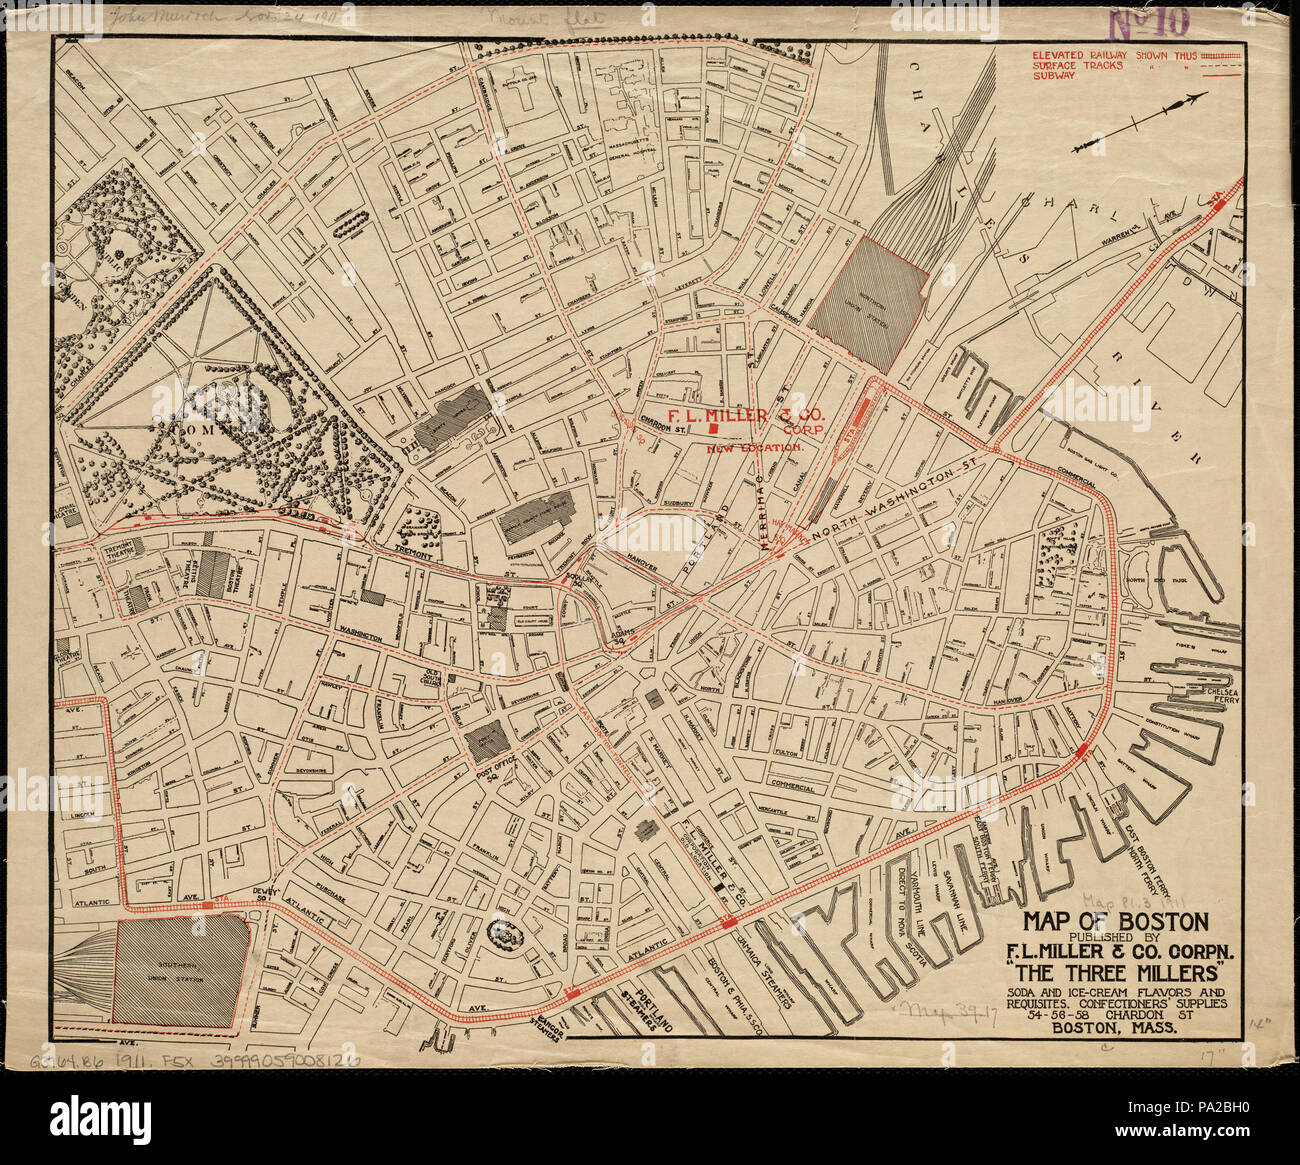 . English: Map of downtown Boston, dated 1911. However, the configuration of the subway lines, with the East Boston Tunnel but not the Washington Street Tunnel, dates the actual map content to between 1904 and 1908. circa 1904-1908 (data) 1911 (dated) 31 1911 downtown Boston map Stock Photo